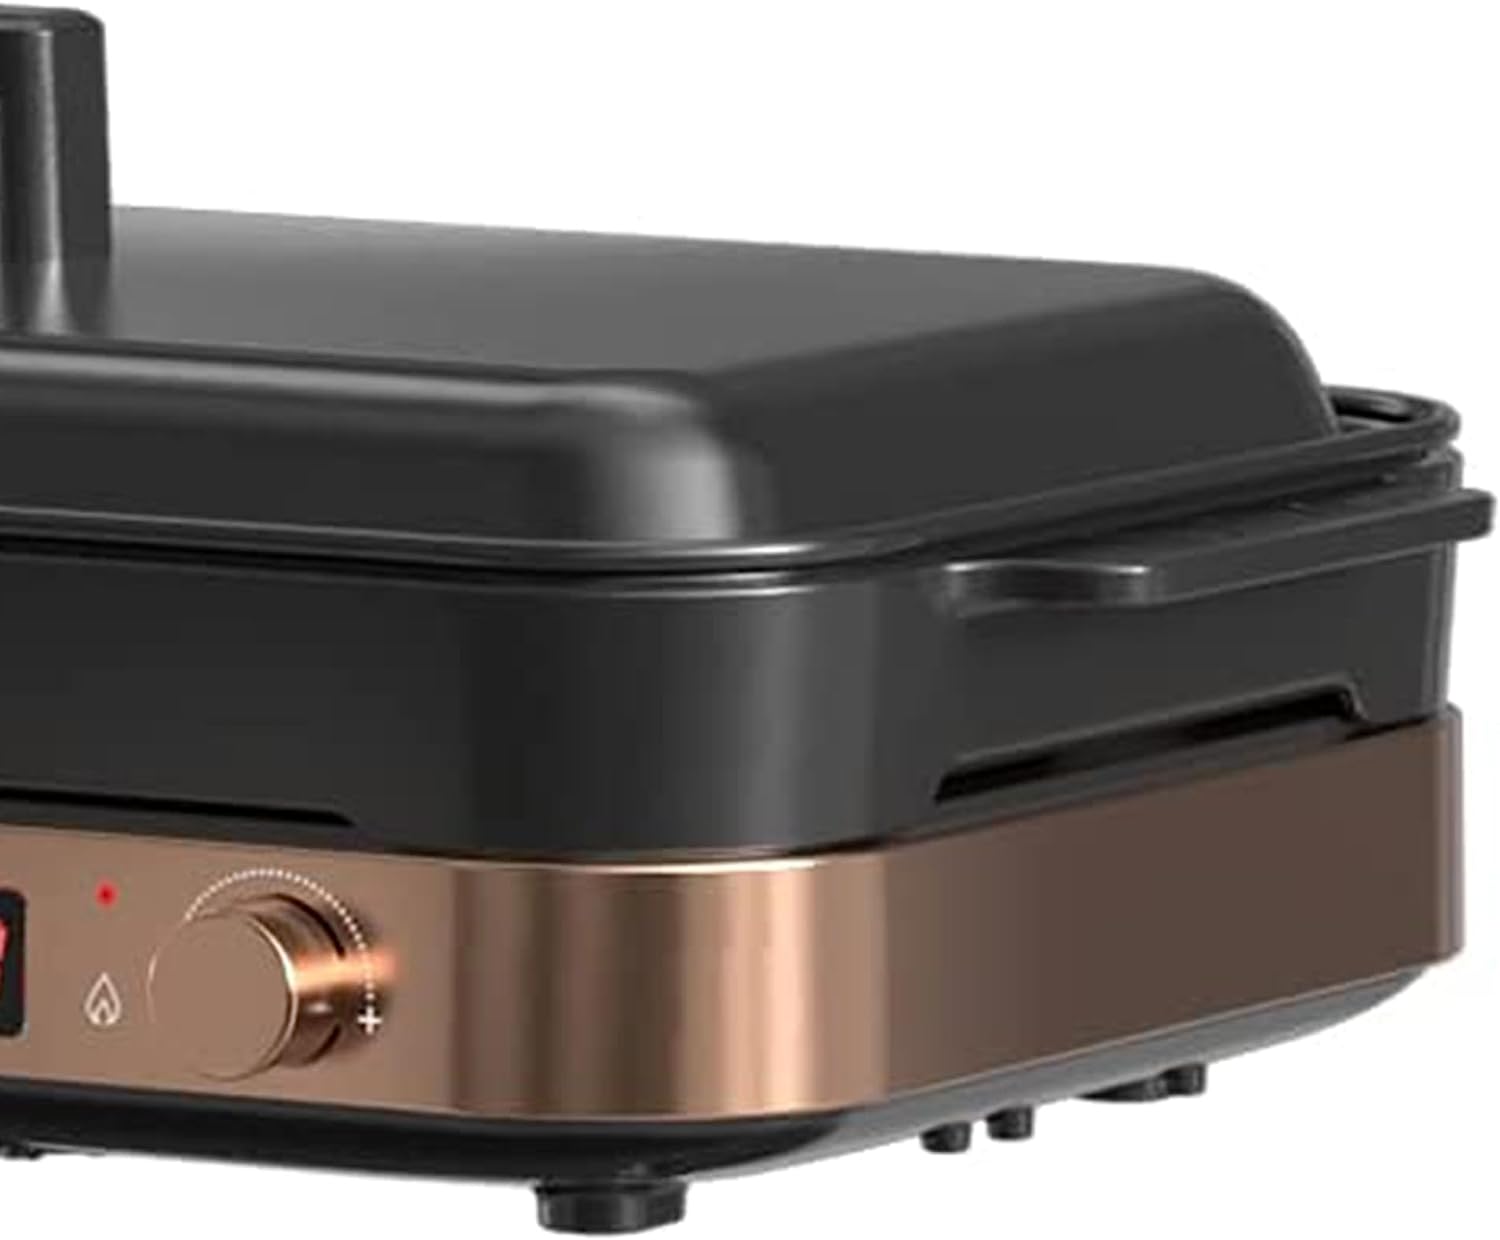  Portable Induction Cooktop Electric Stove &Cast Iron Griddle,Rose  Gold(Open Box): Home & Kitchen